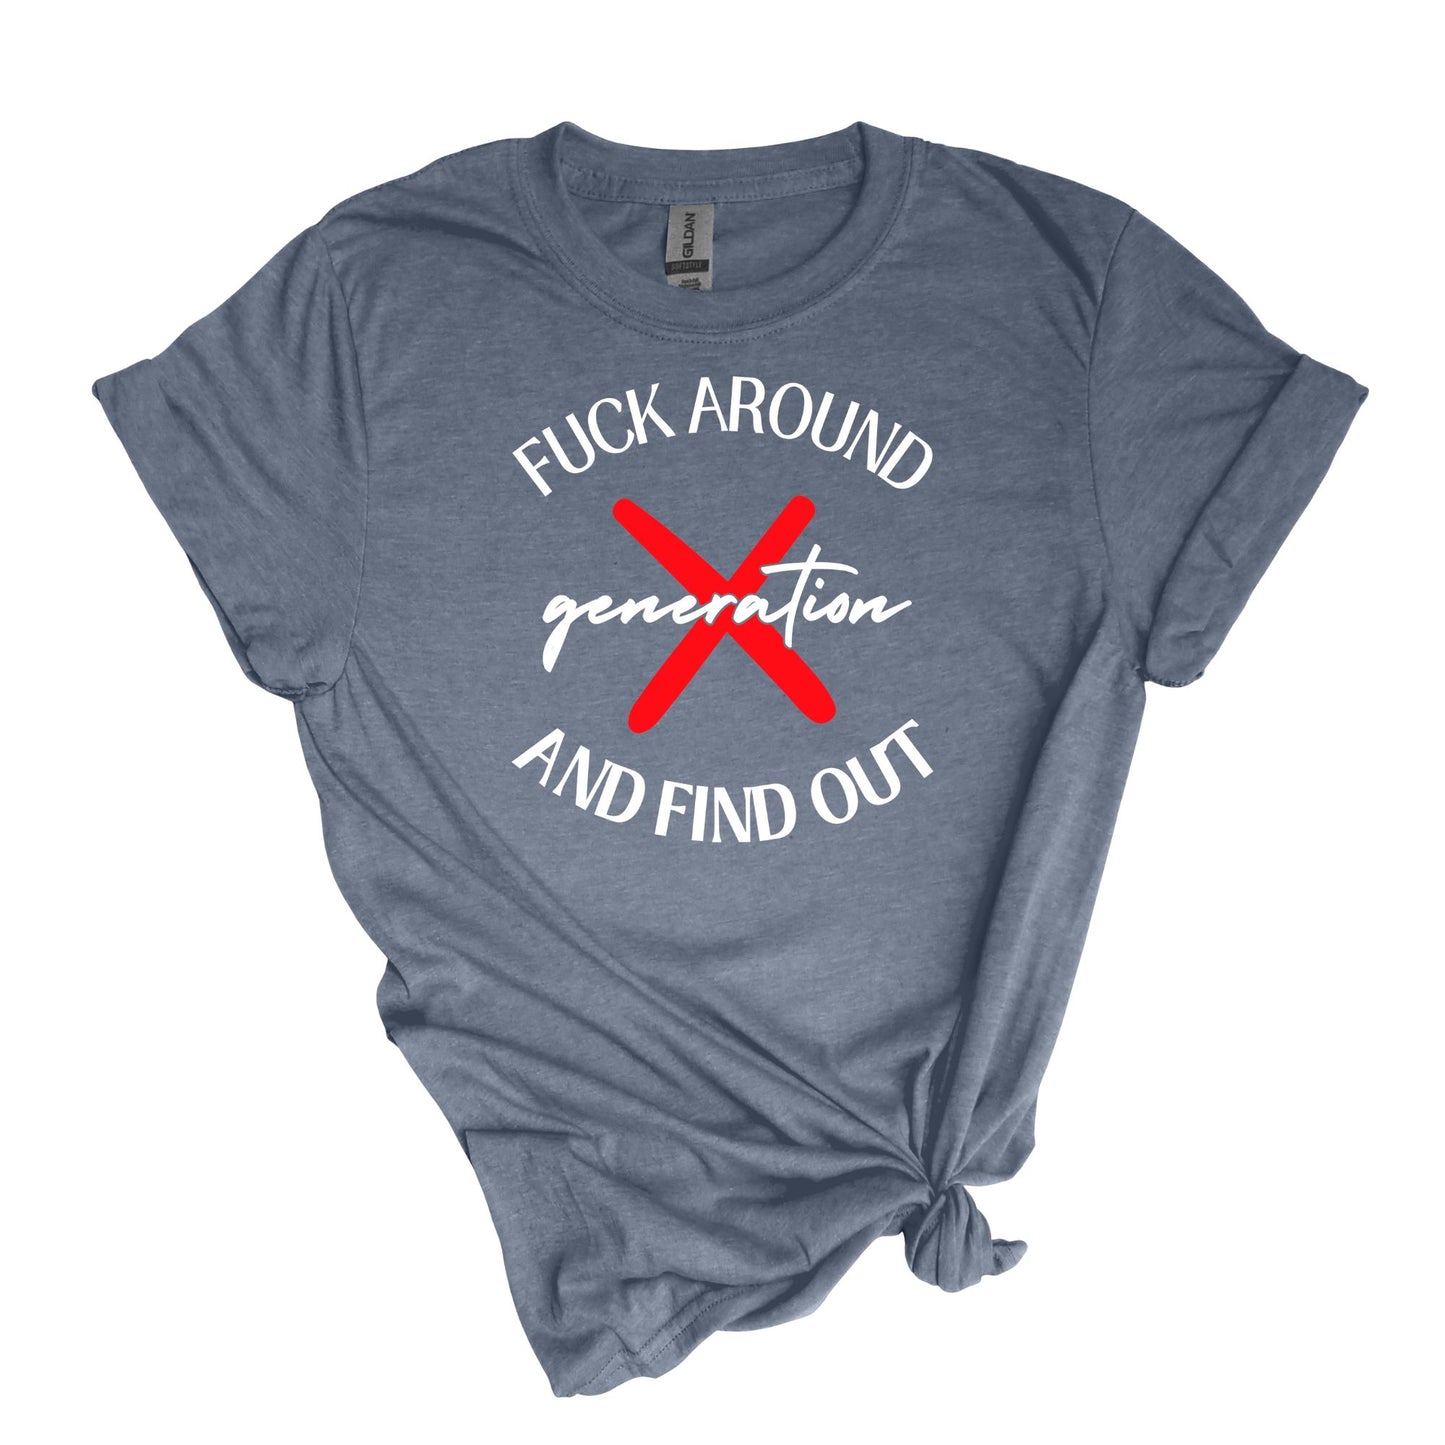 F**K AROUND AND FIND OUT - Gen X - Adult Soft-style T-shirt